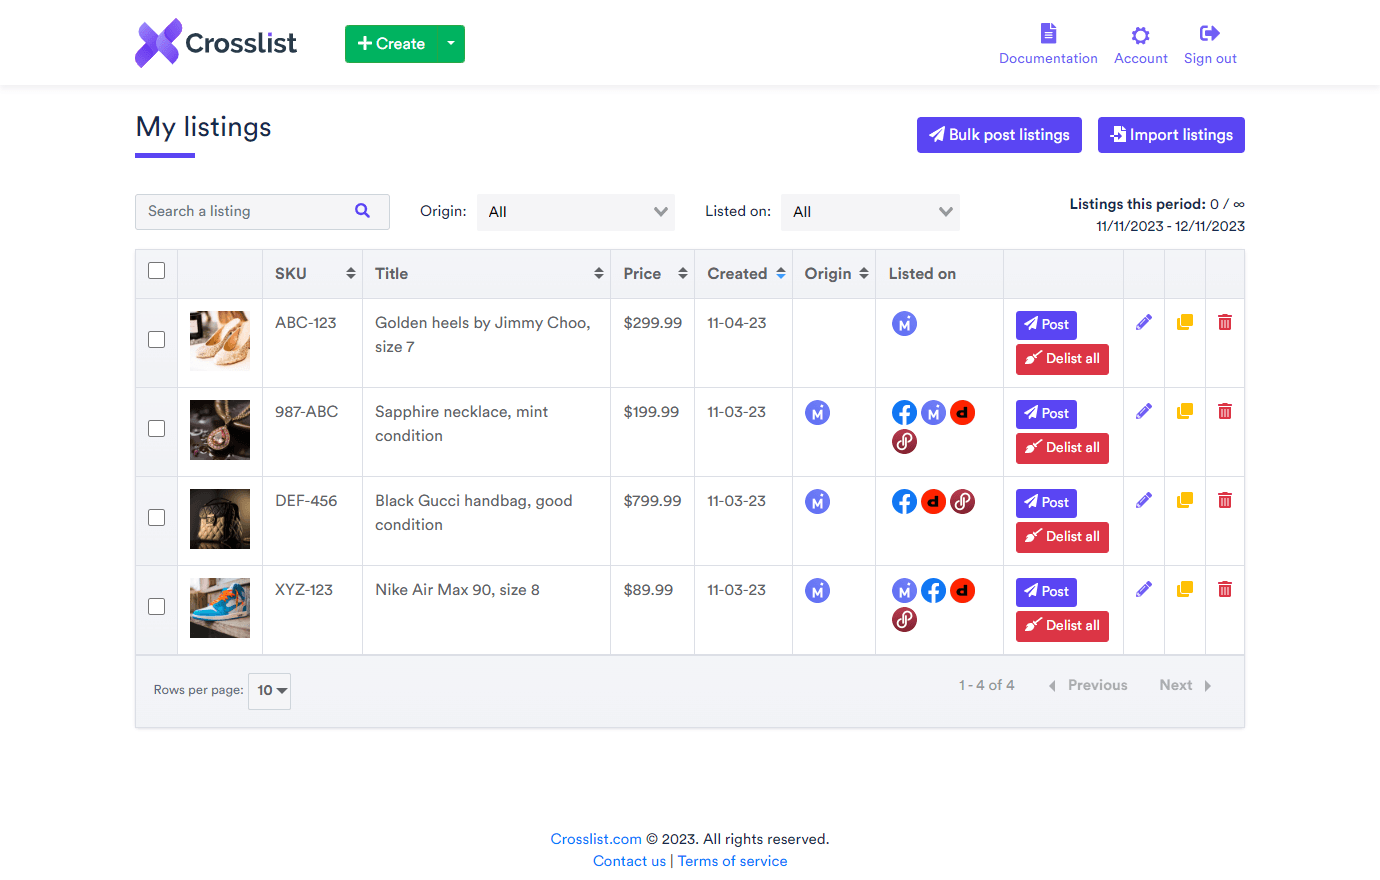 Feature 2 - Manage Inventory From One Dashboard